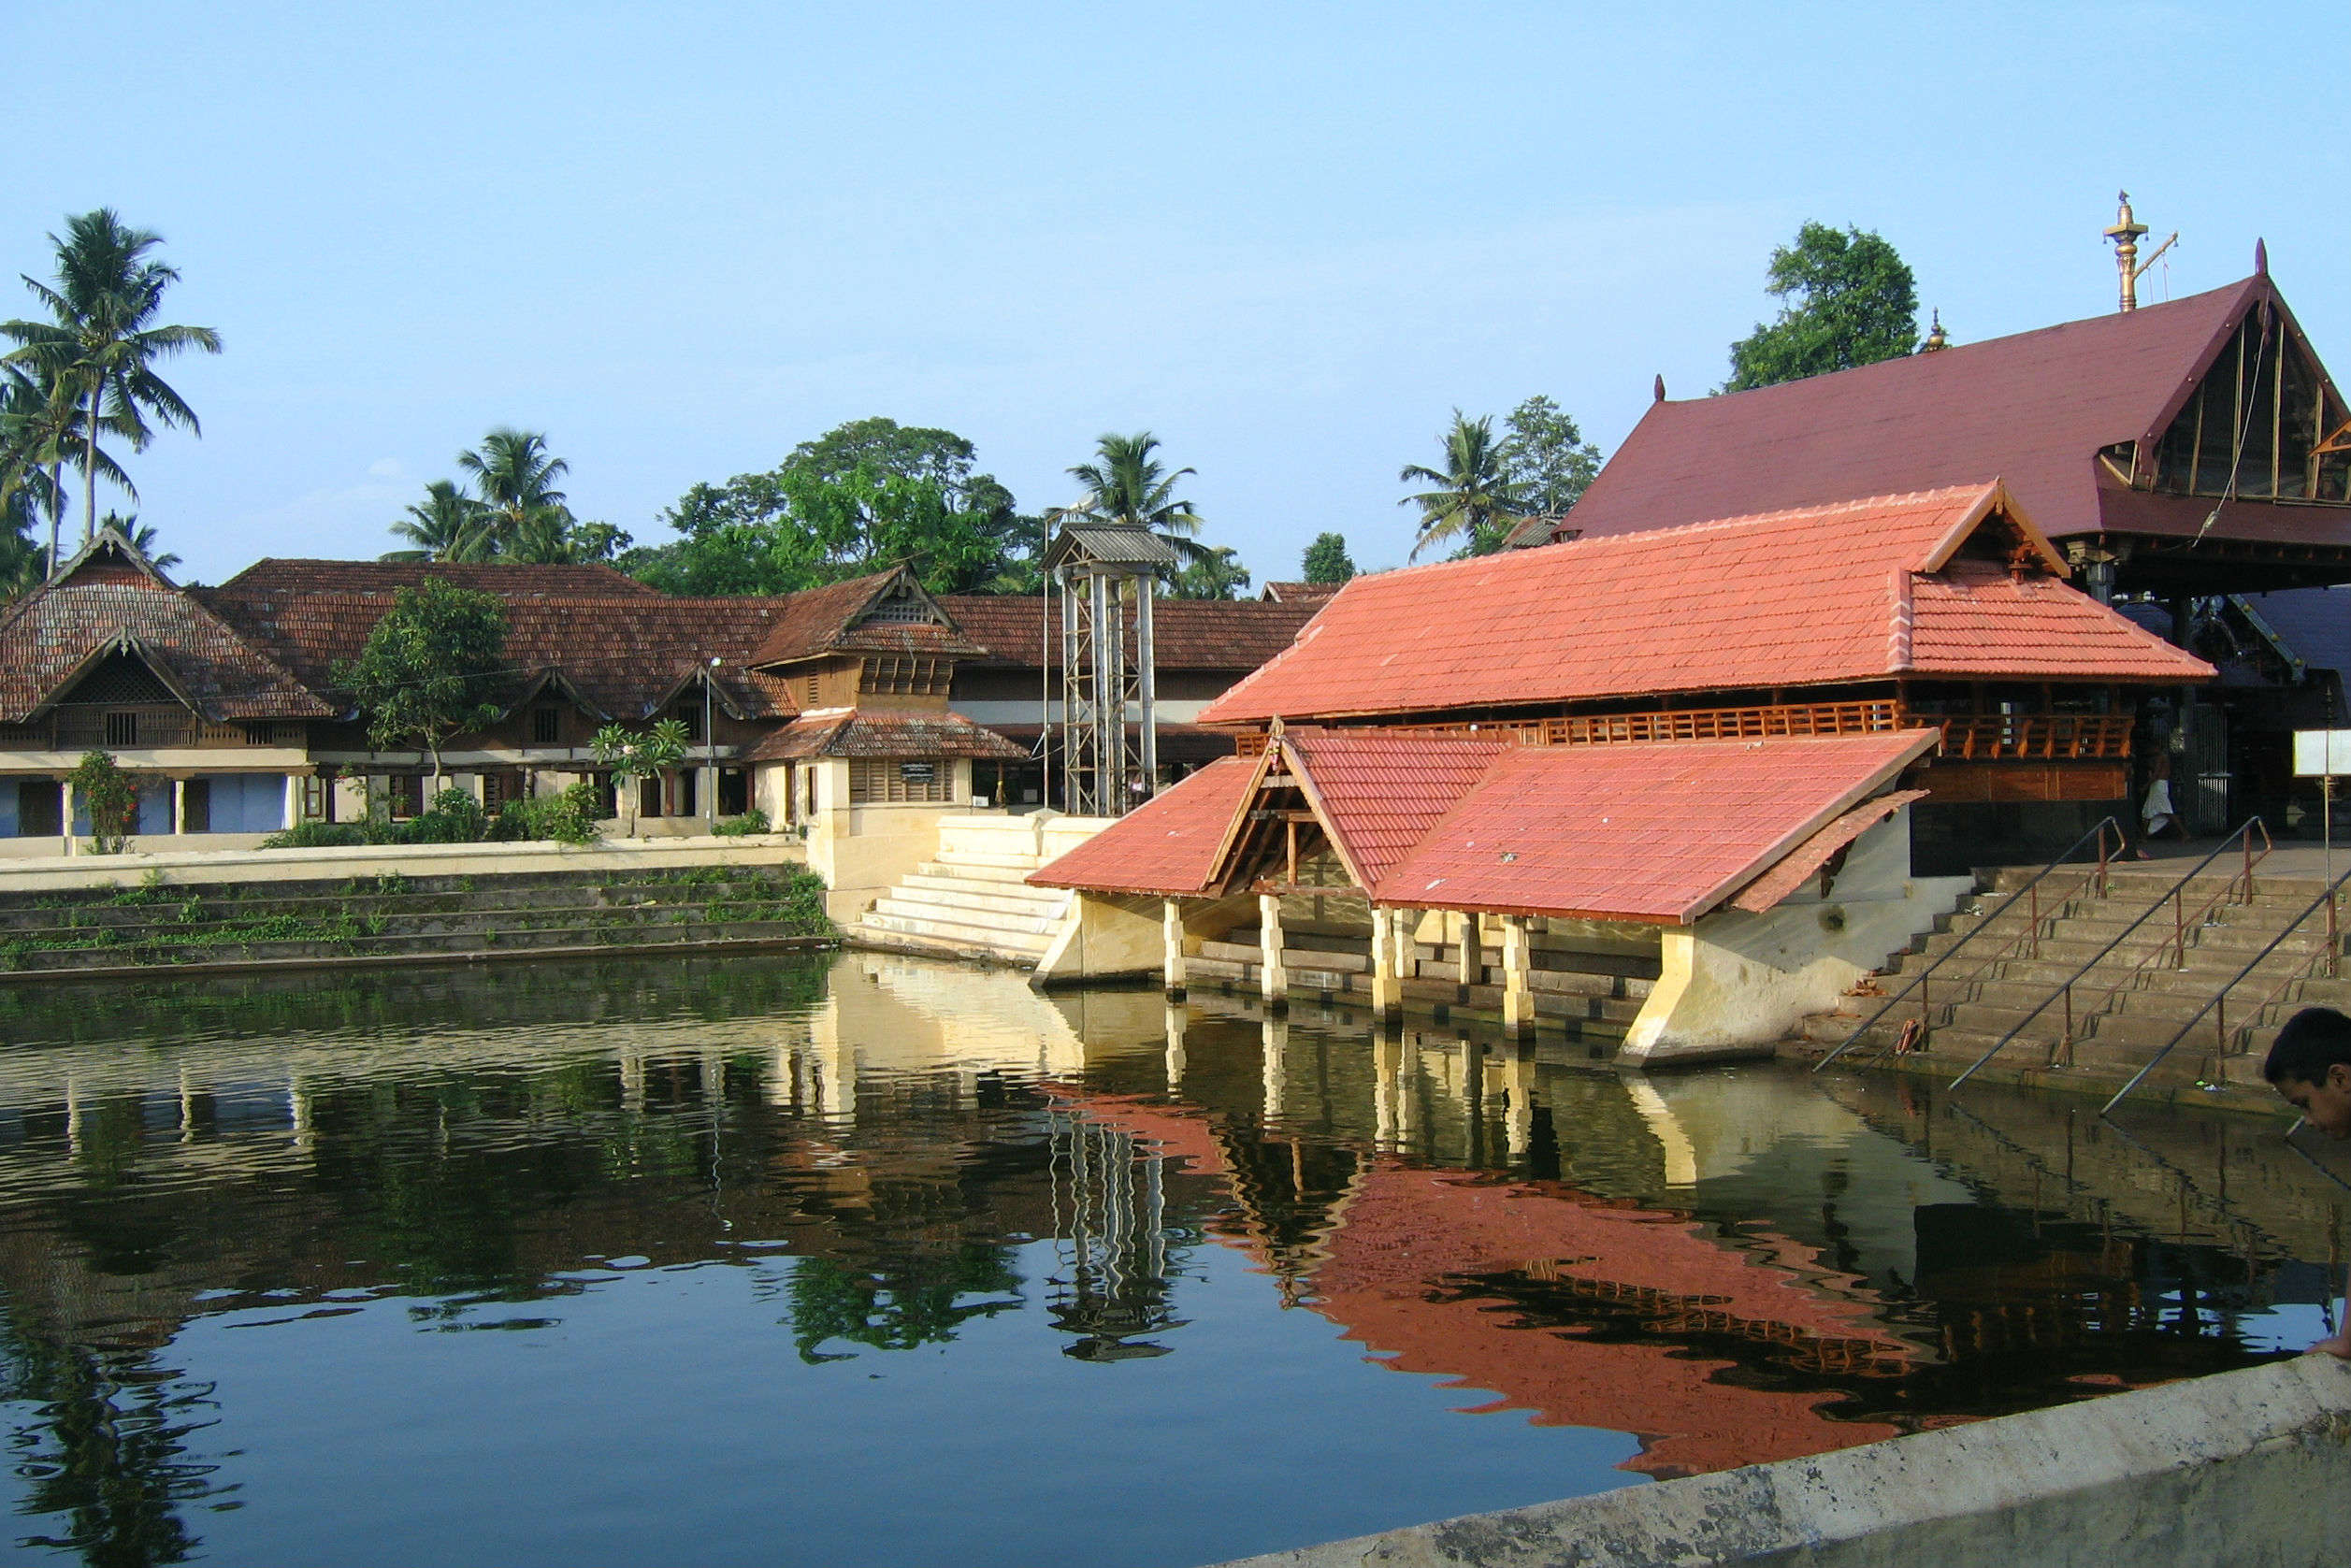 Ambalapuzha temple’s famous paal payasam to be served in eco-friendly paper containers